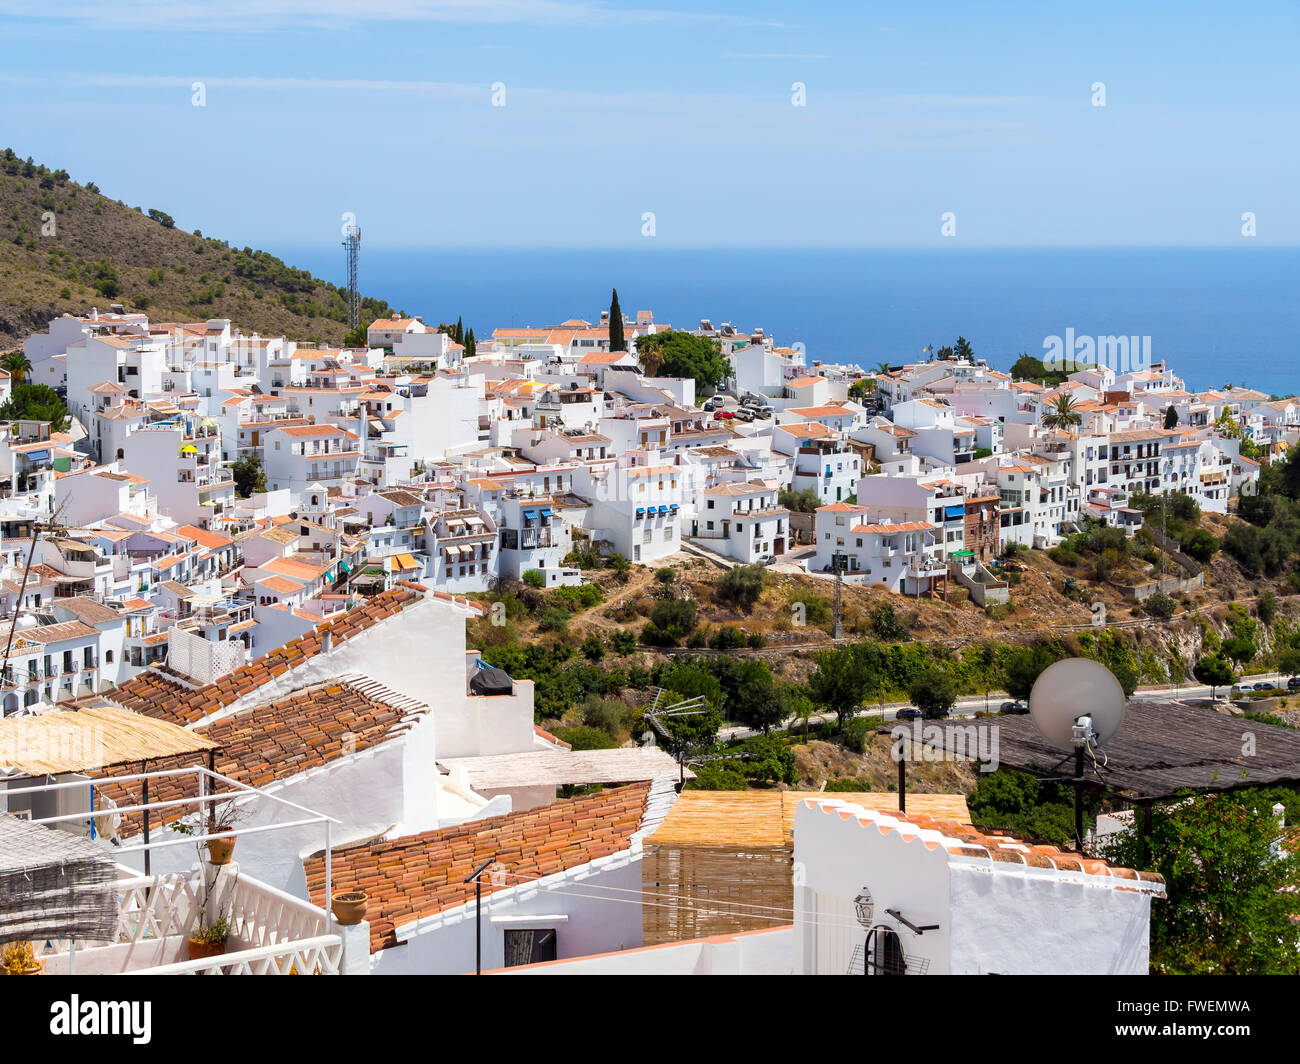 View of white houses in Frigiliana, Costa del Sol, Andalucía, Spain Stock Photo